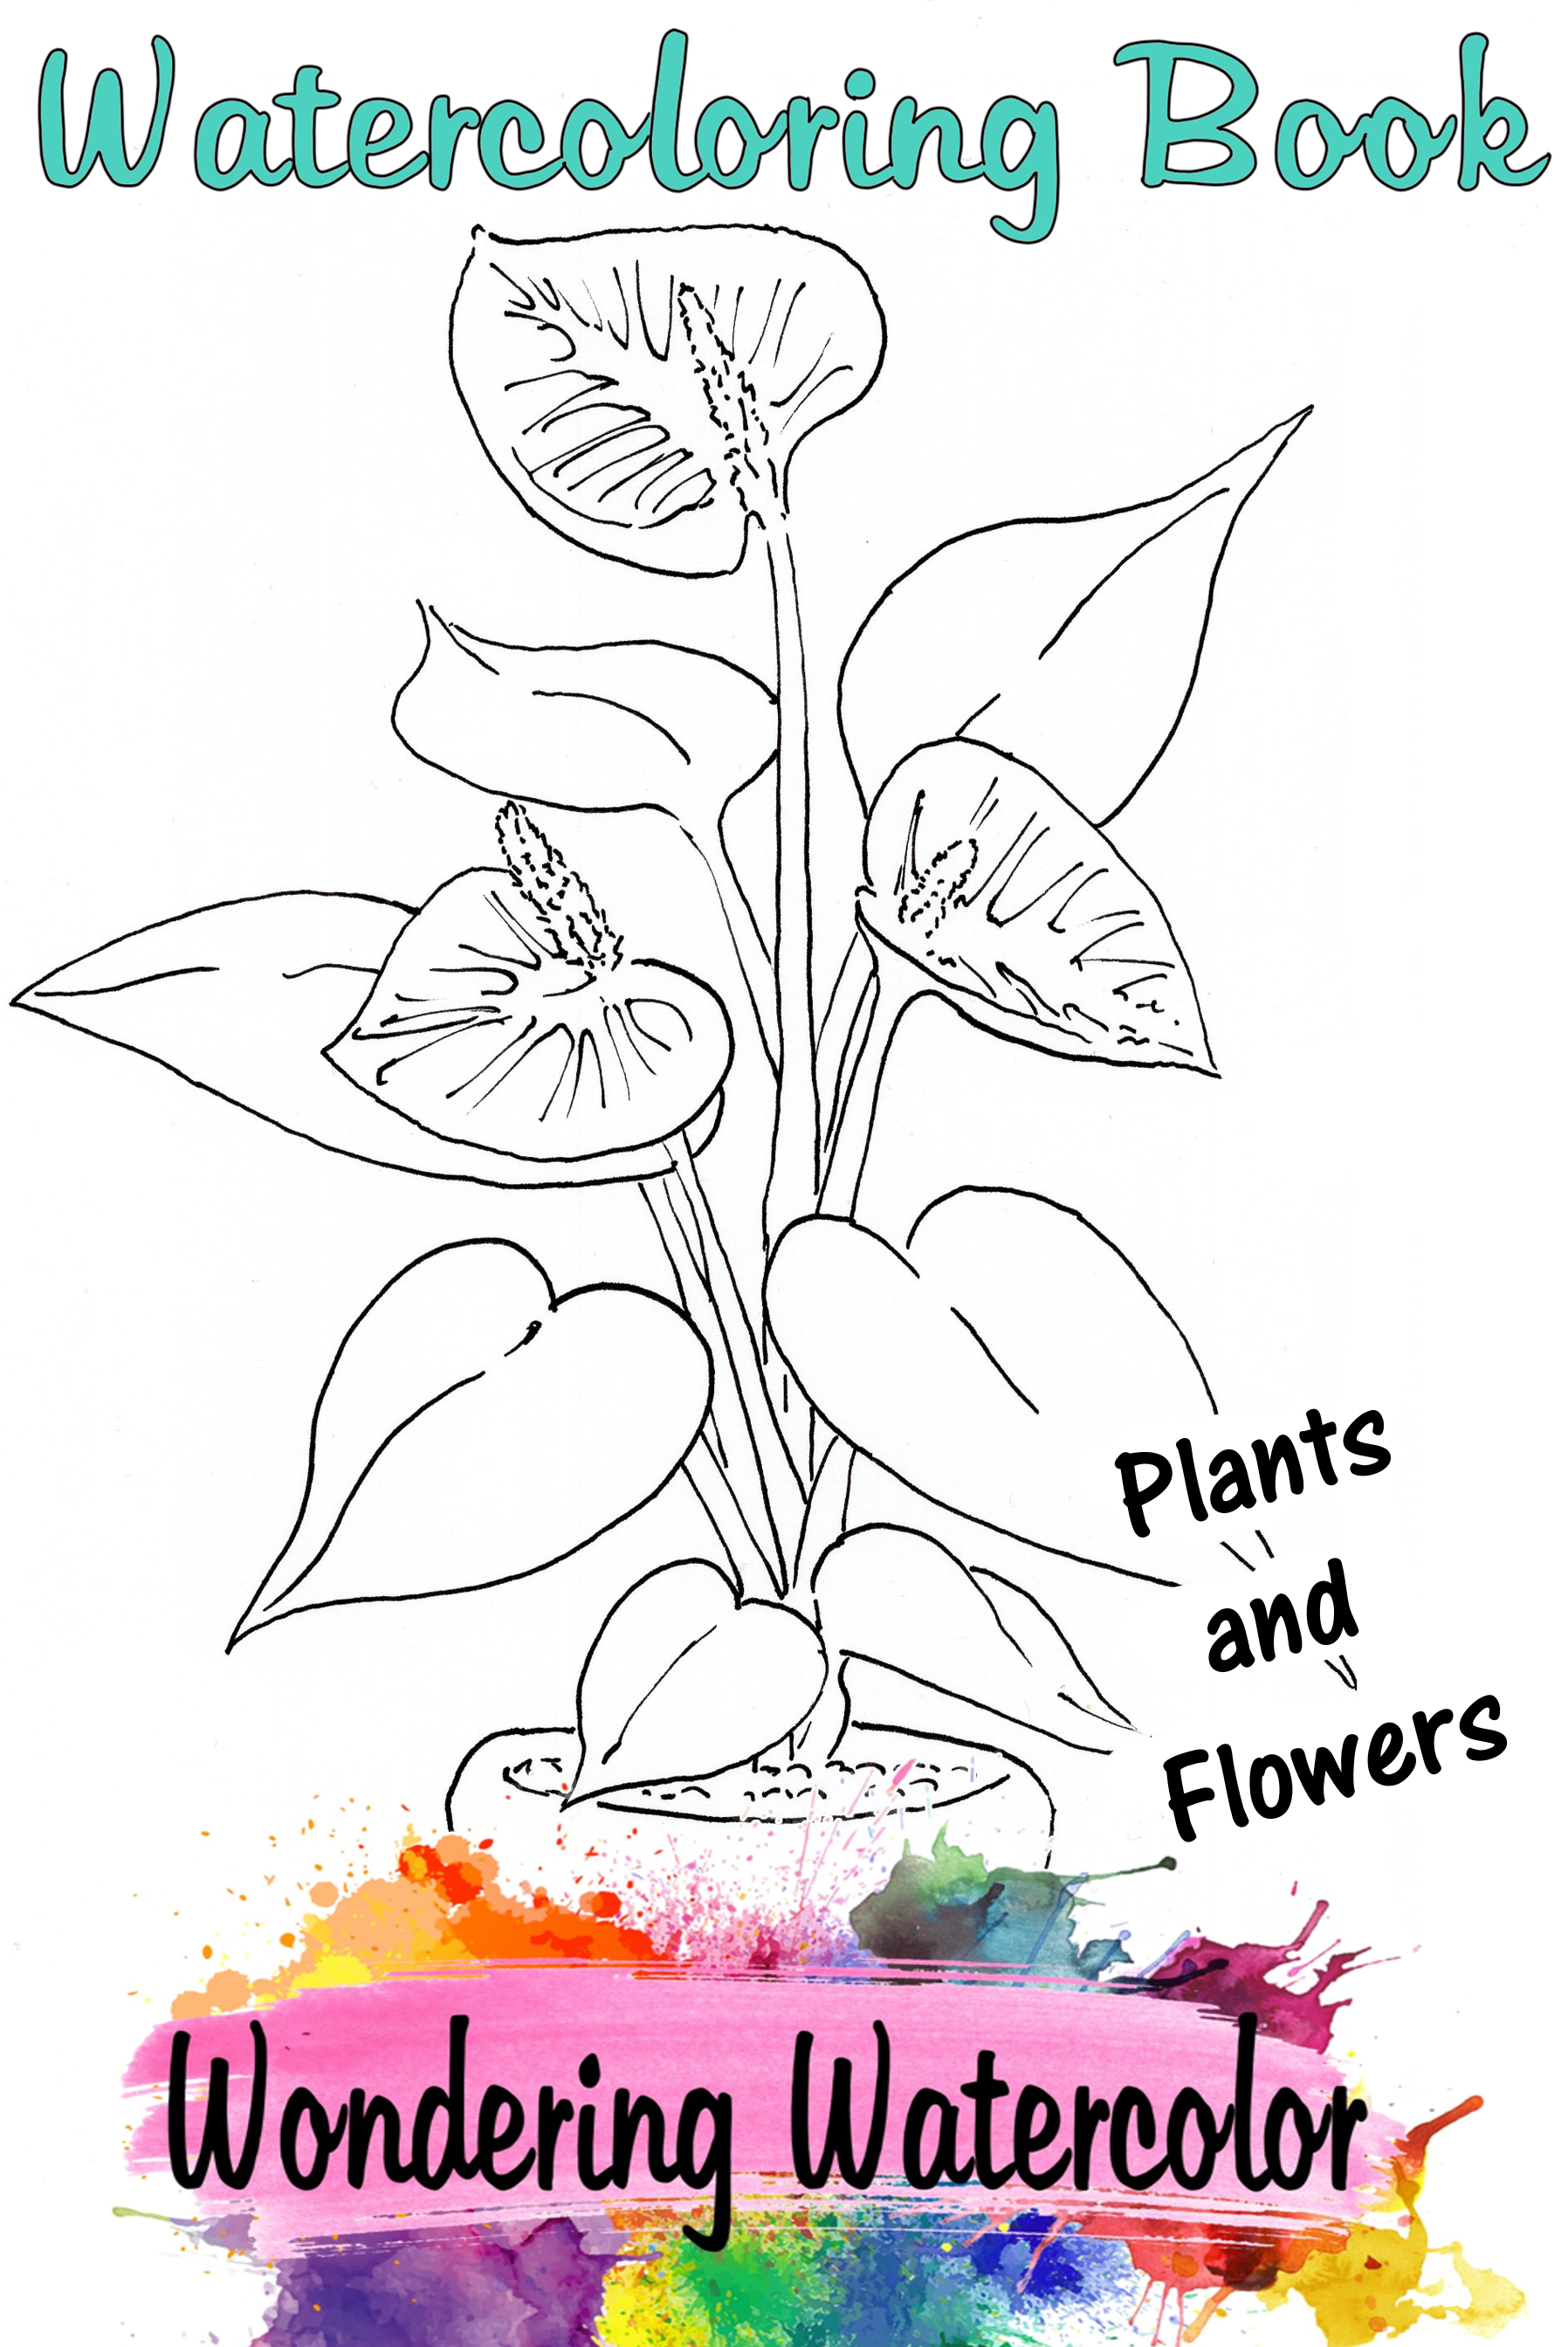 Plants and Flowers themed watercolor coloring book – Wondering Watercolor